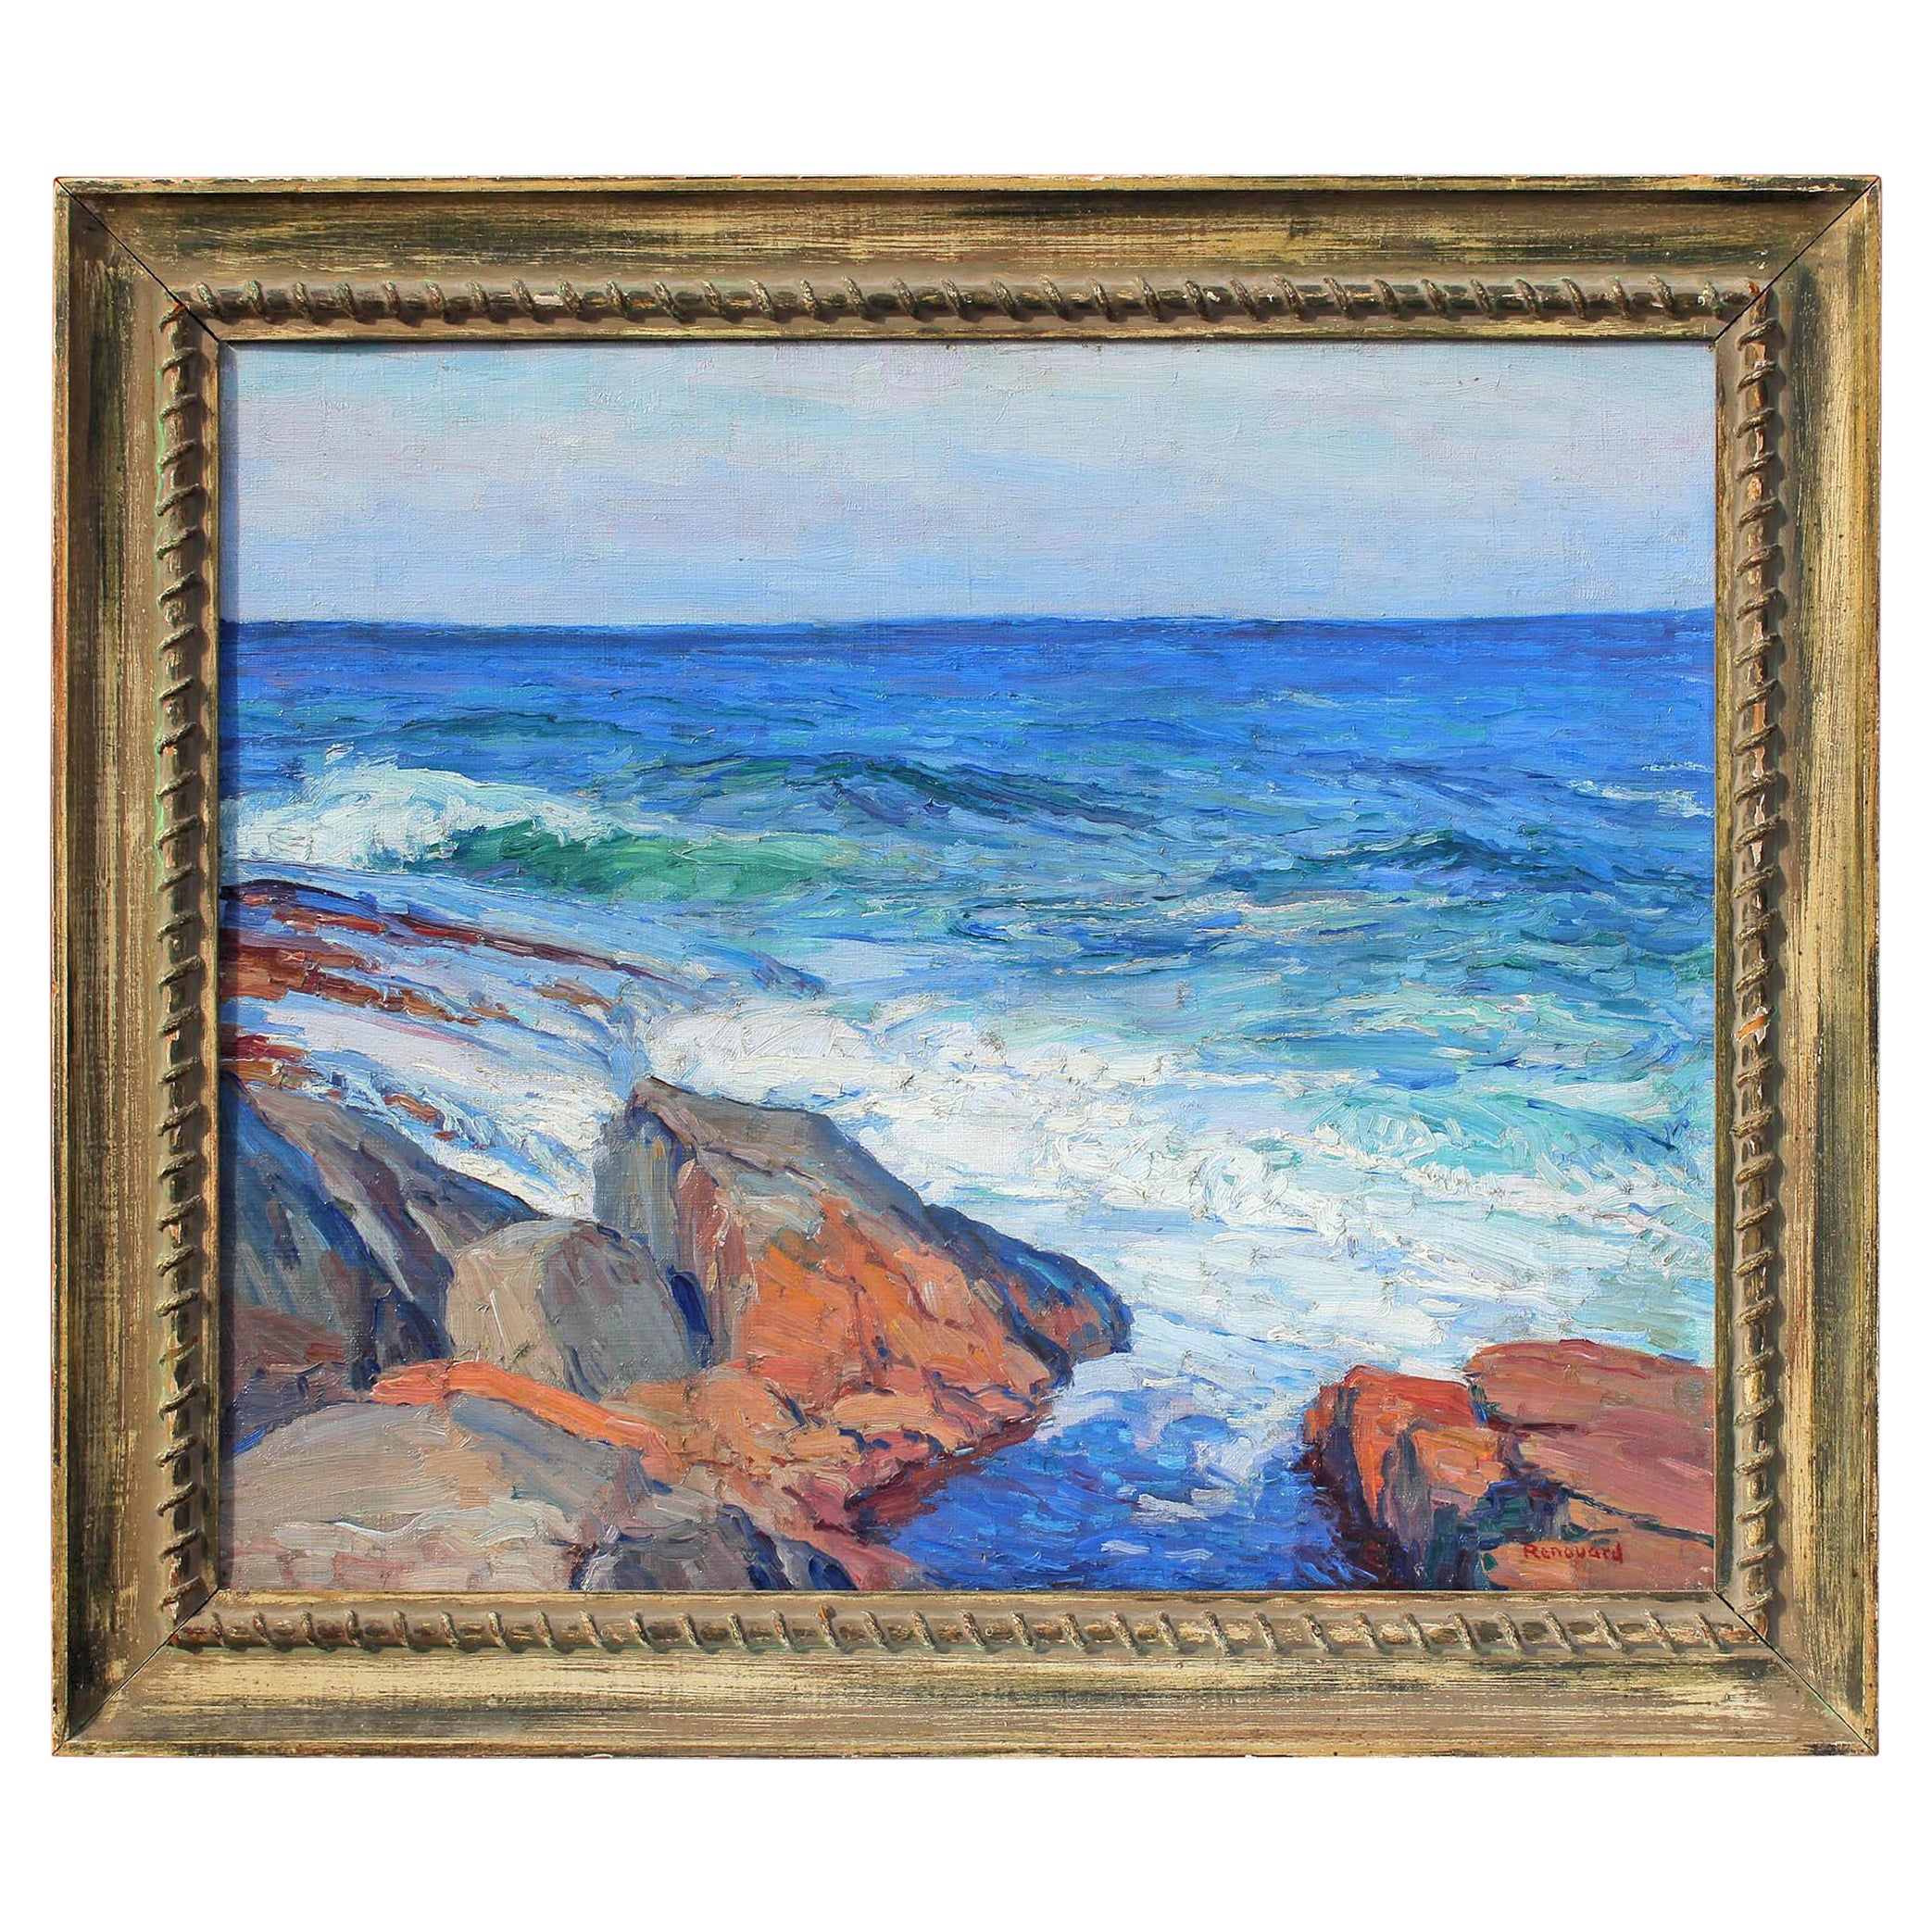 Impressionist American seascape, oil painting by George Renouard. Inscribed on reverse "1st Chapter-Genesis by Renouard". Oil on canvas. Signé en bas à droite. Original frame. Measures: 20" x 24" without frame.
George Renouard, was born in